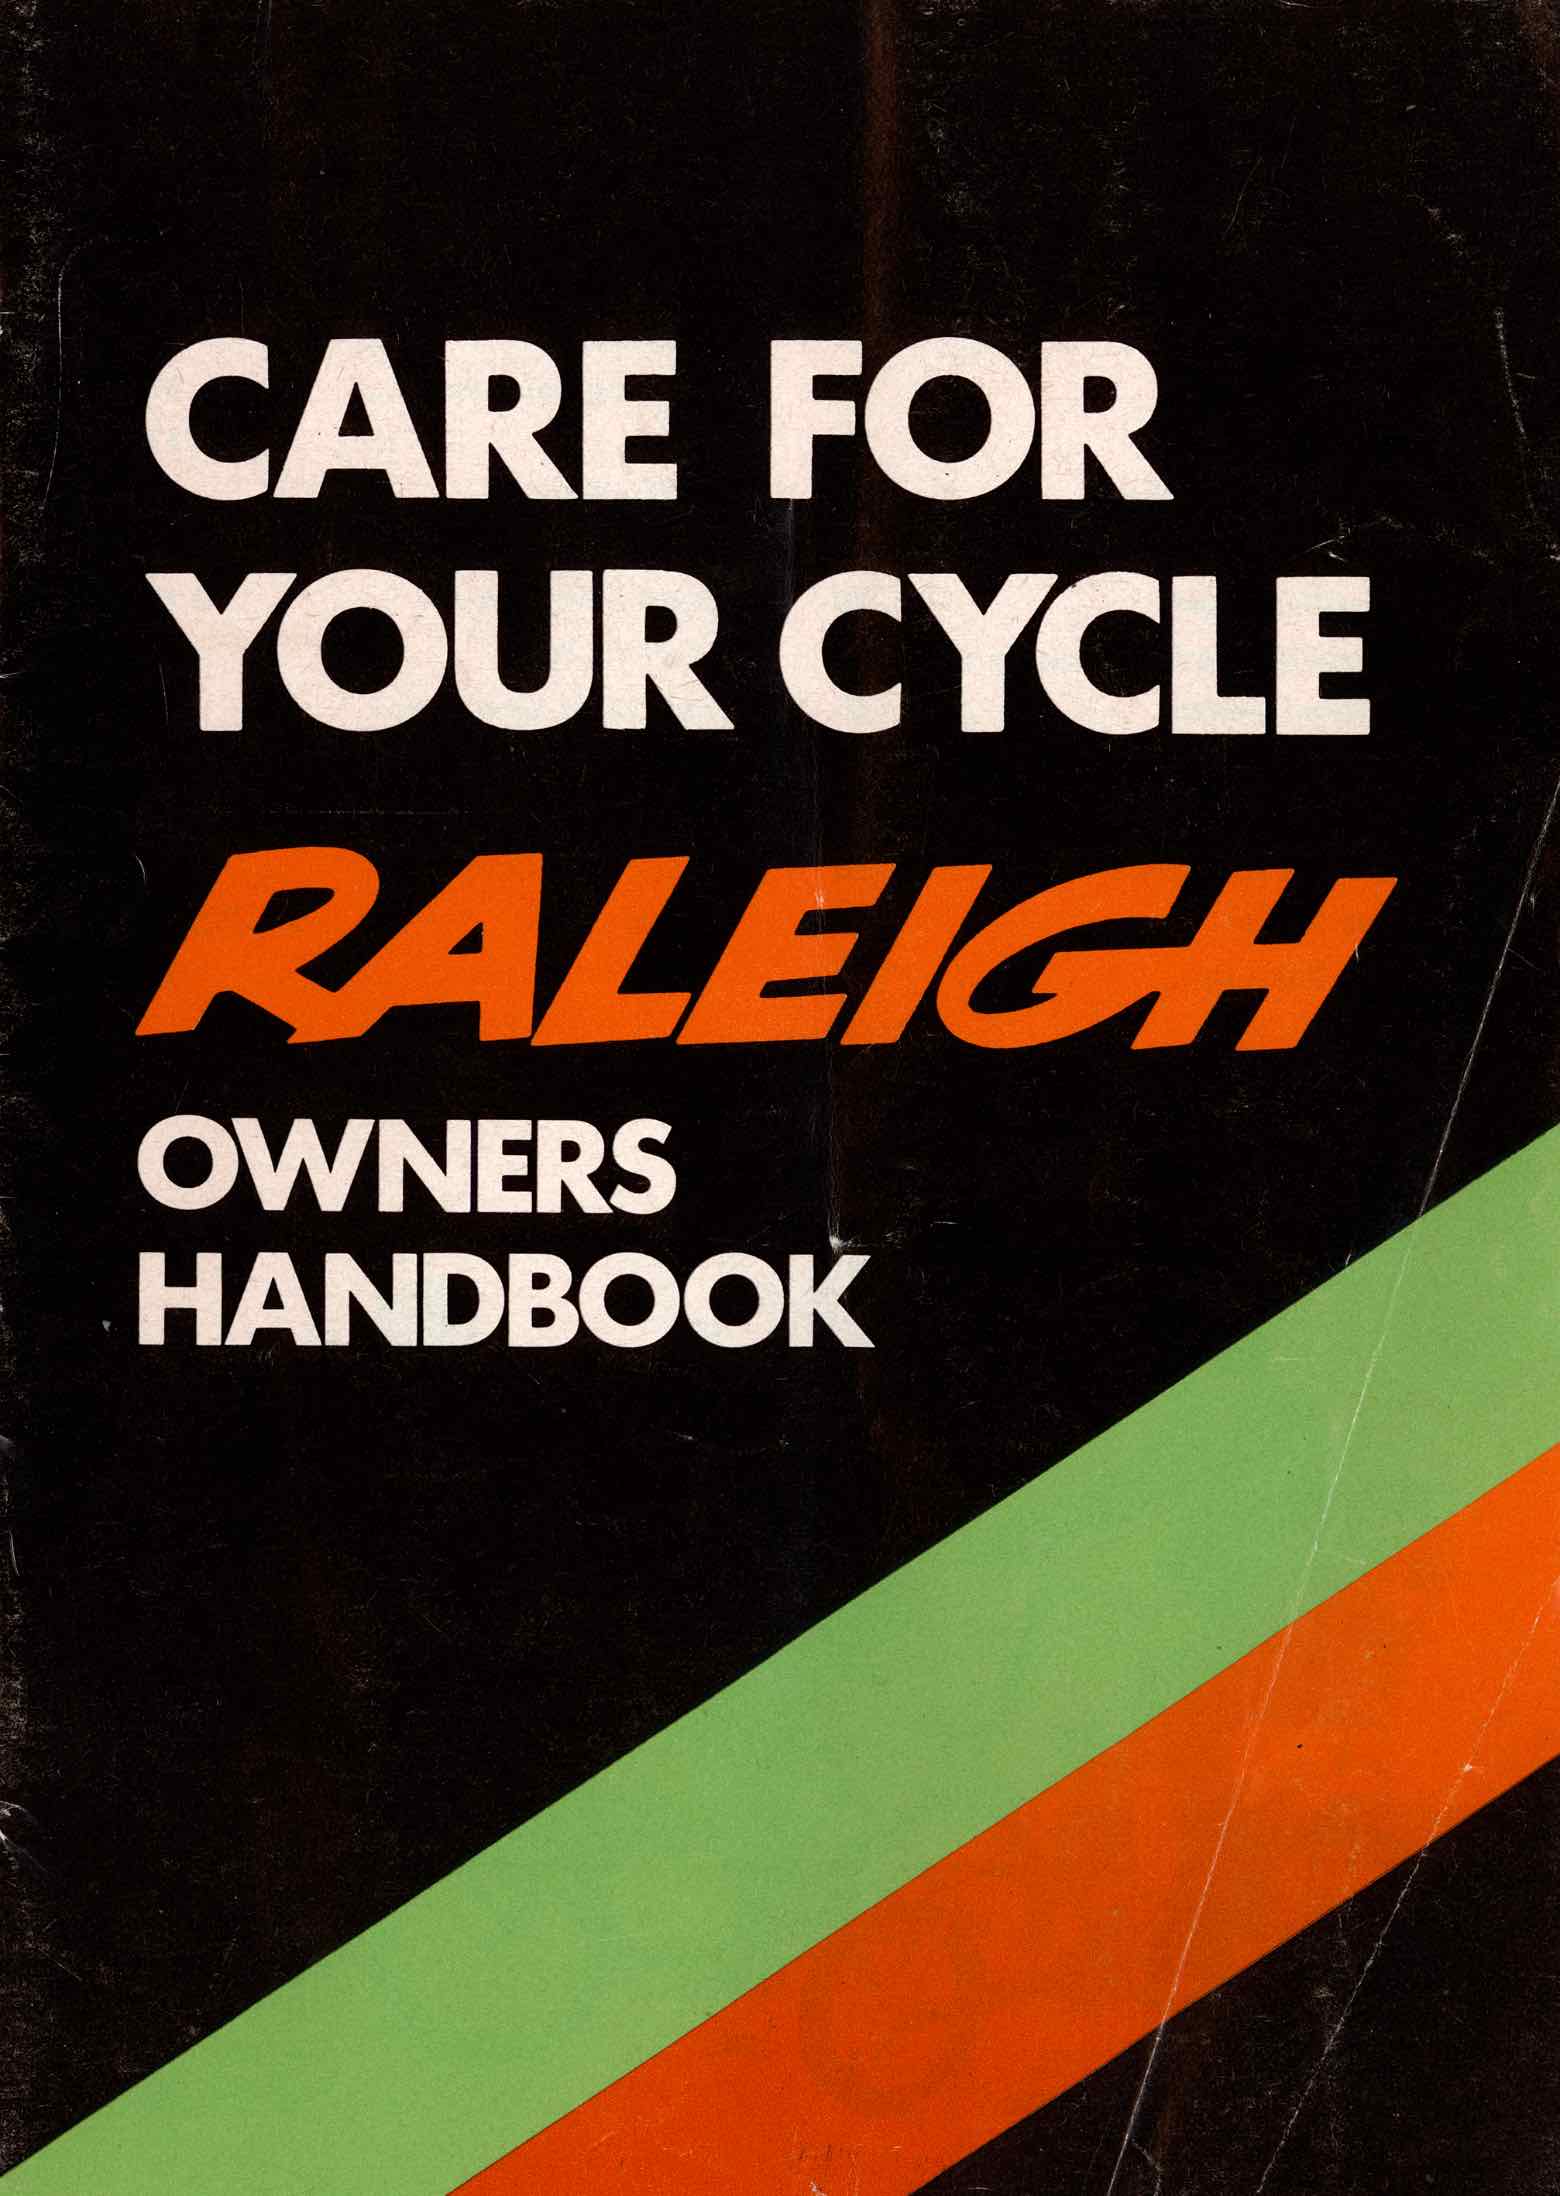 Raleigh Owners Handbook - page 1 main image